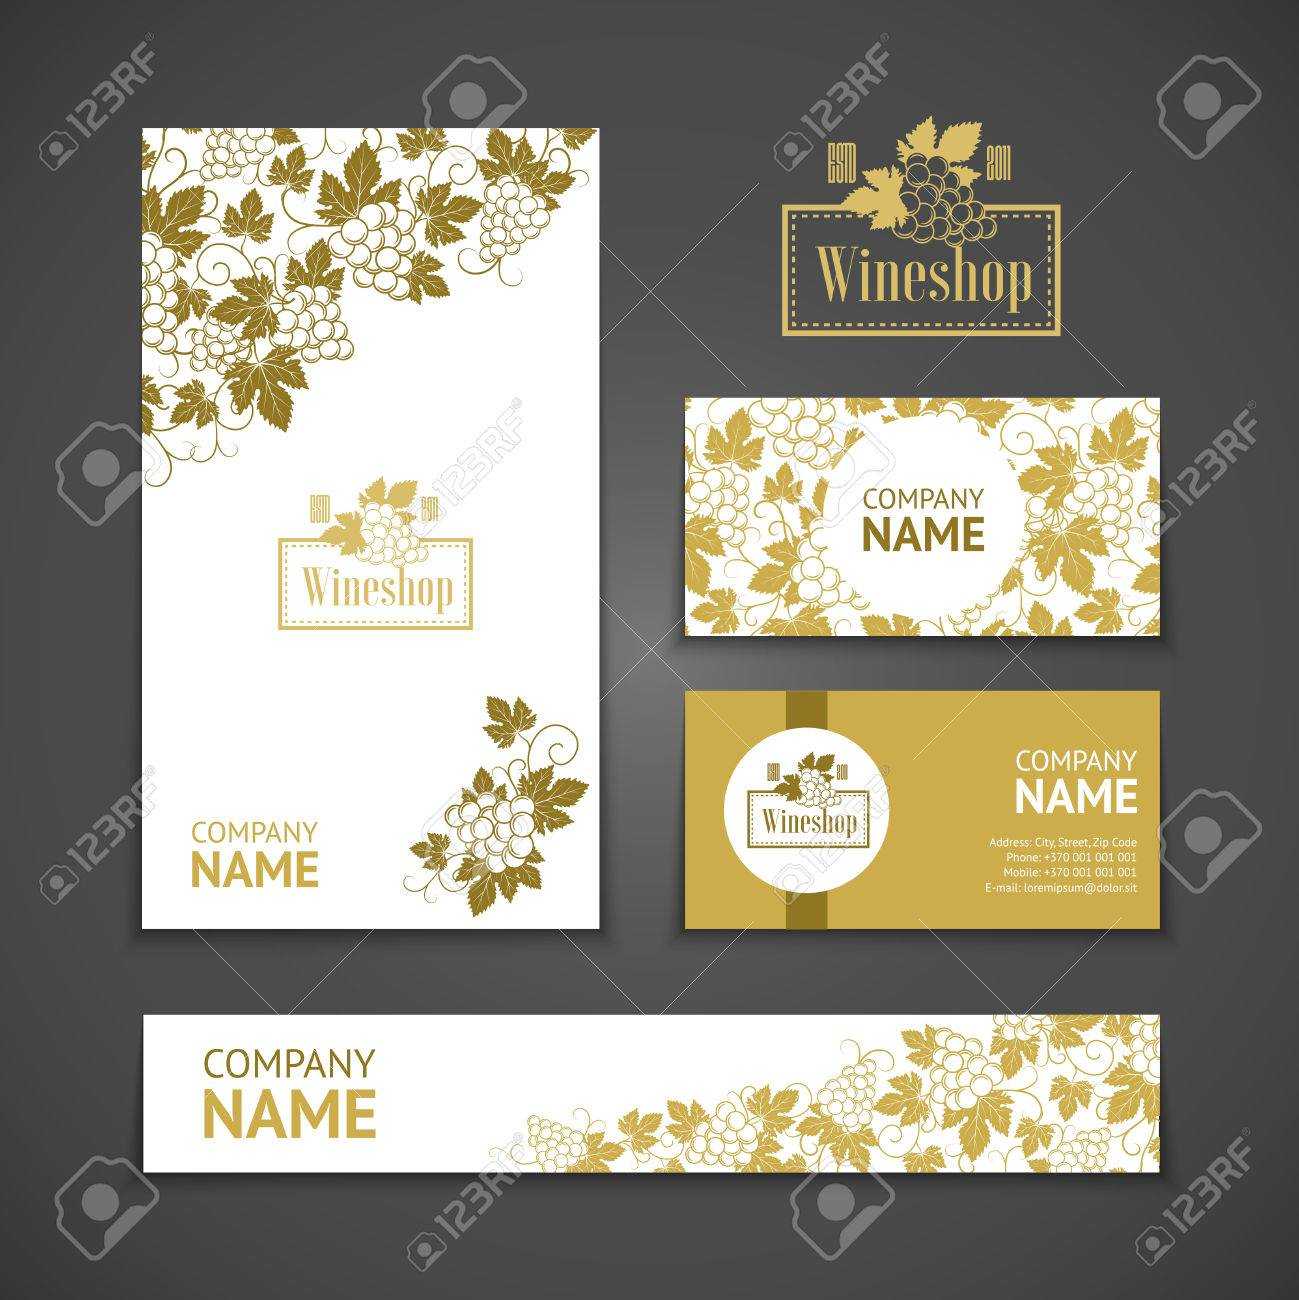 Set Of Business Cards. Templates For Wine Company For Company Business Cards Templates